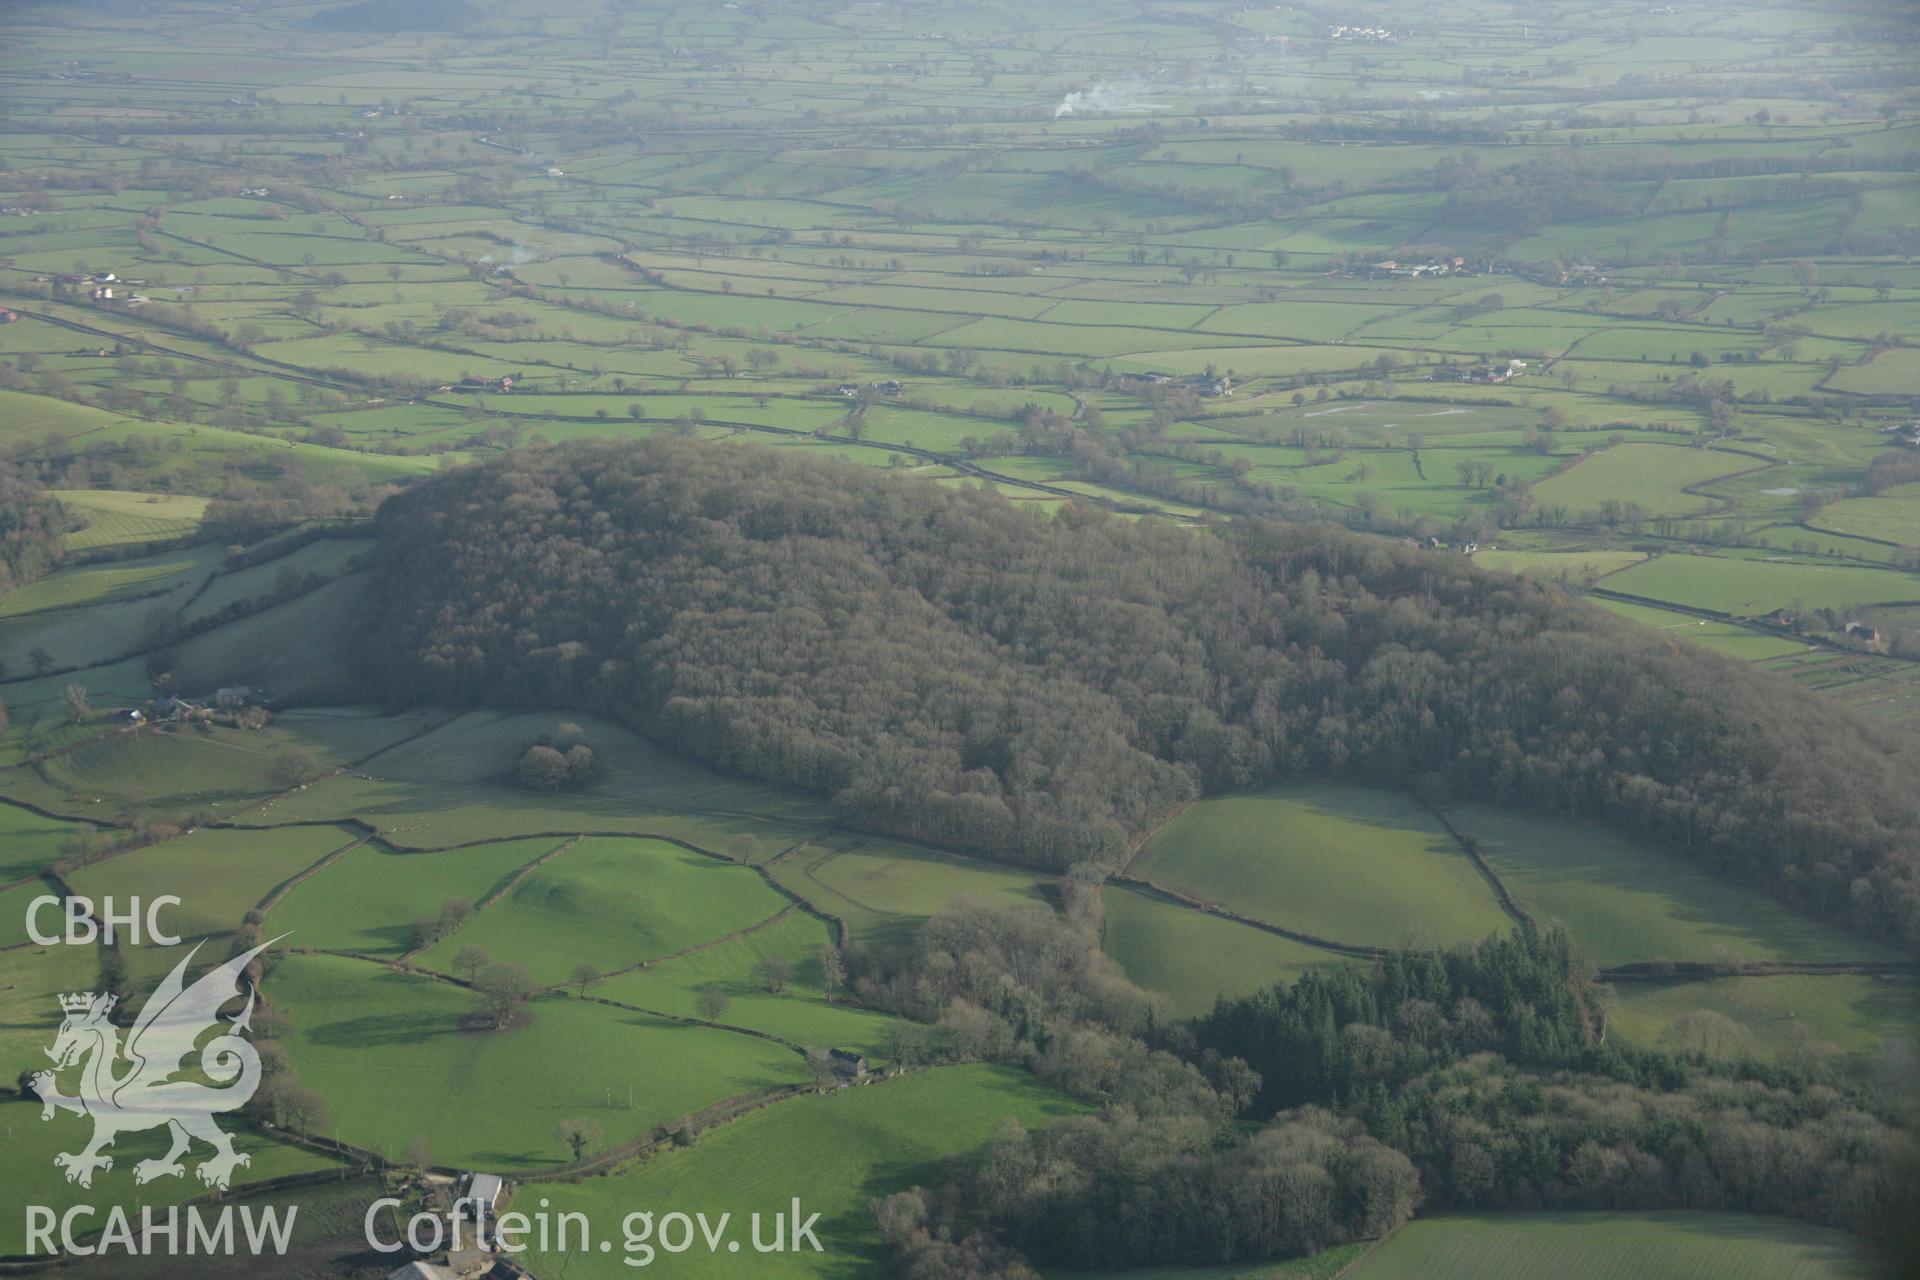 RCAHMW colour oblique aerial photograph of Gaer Fawr, Guilsfiel, and surrounding landscape. Taken on 25 January 2007 by Toby Driver